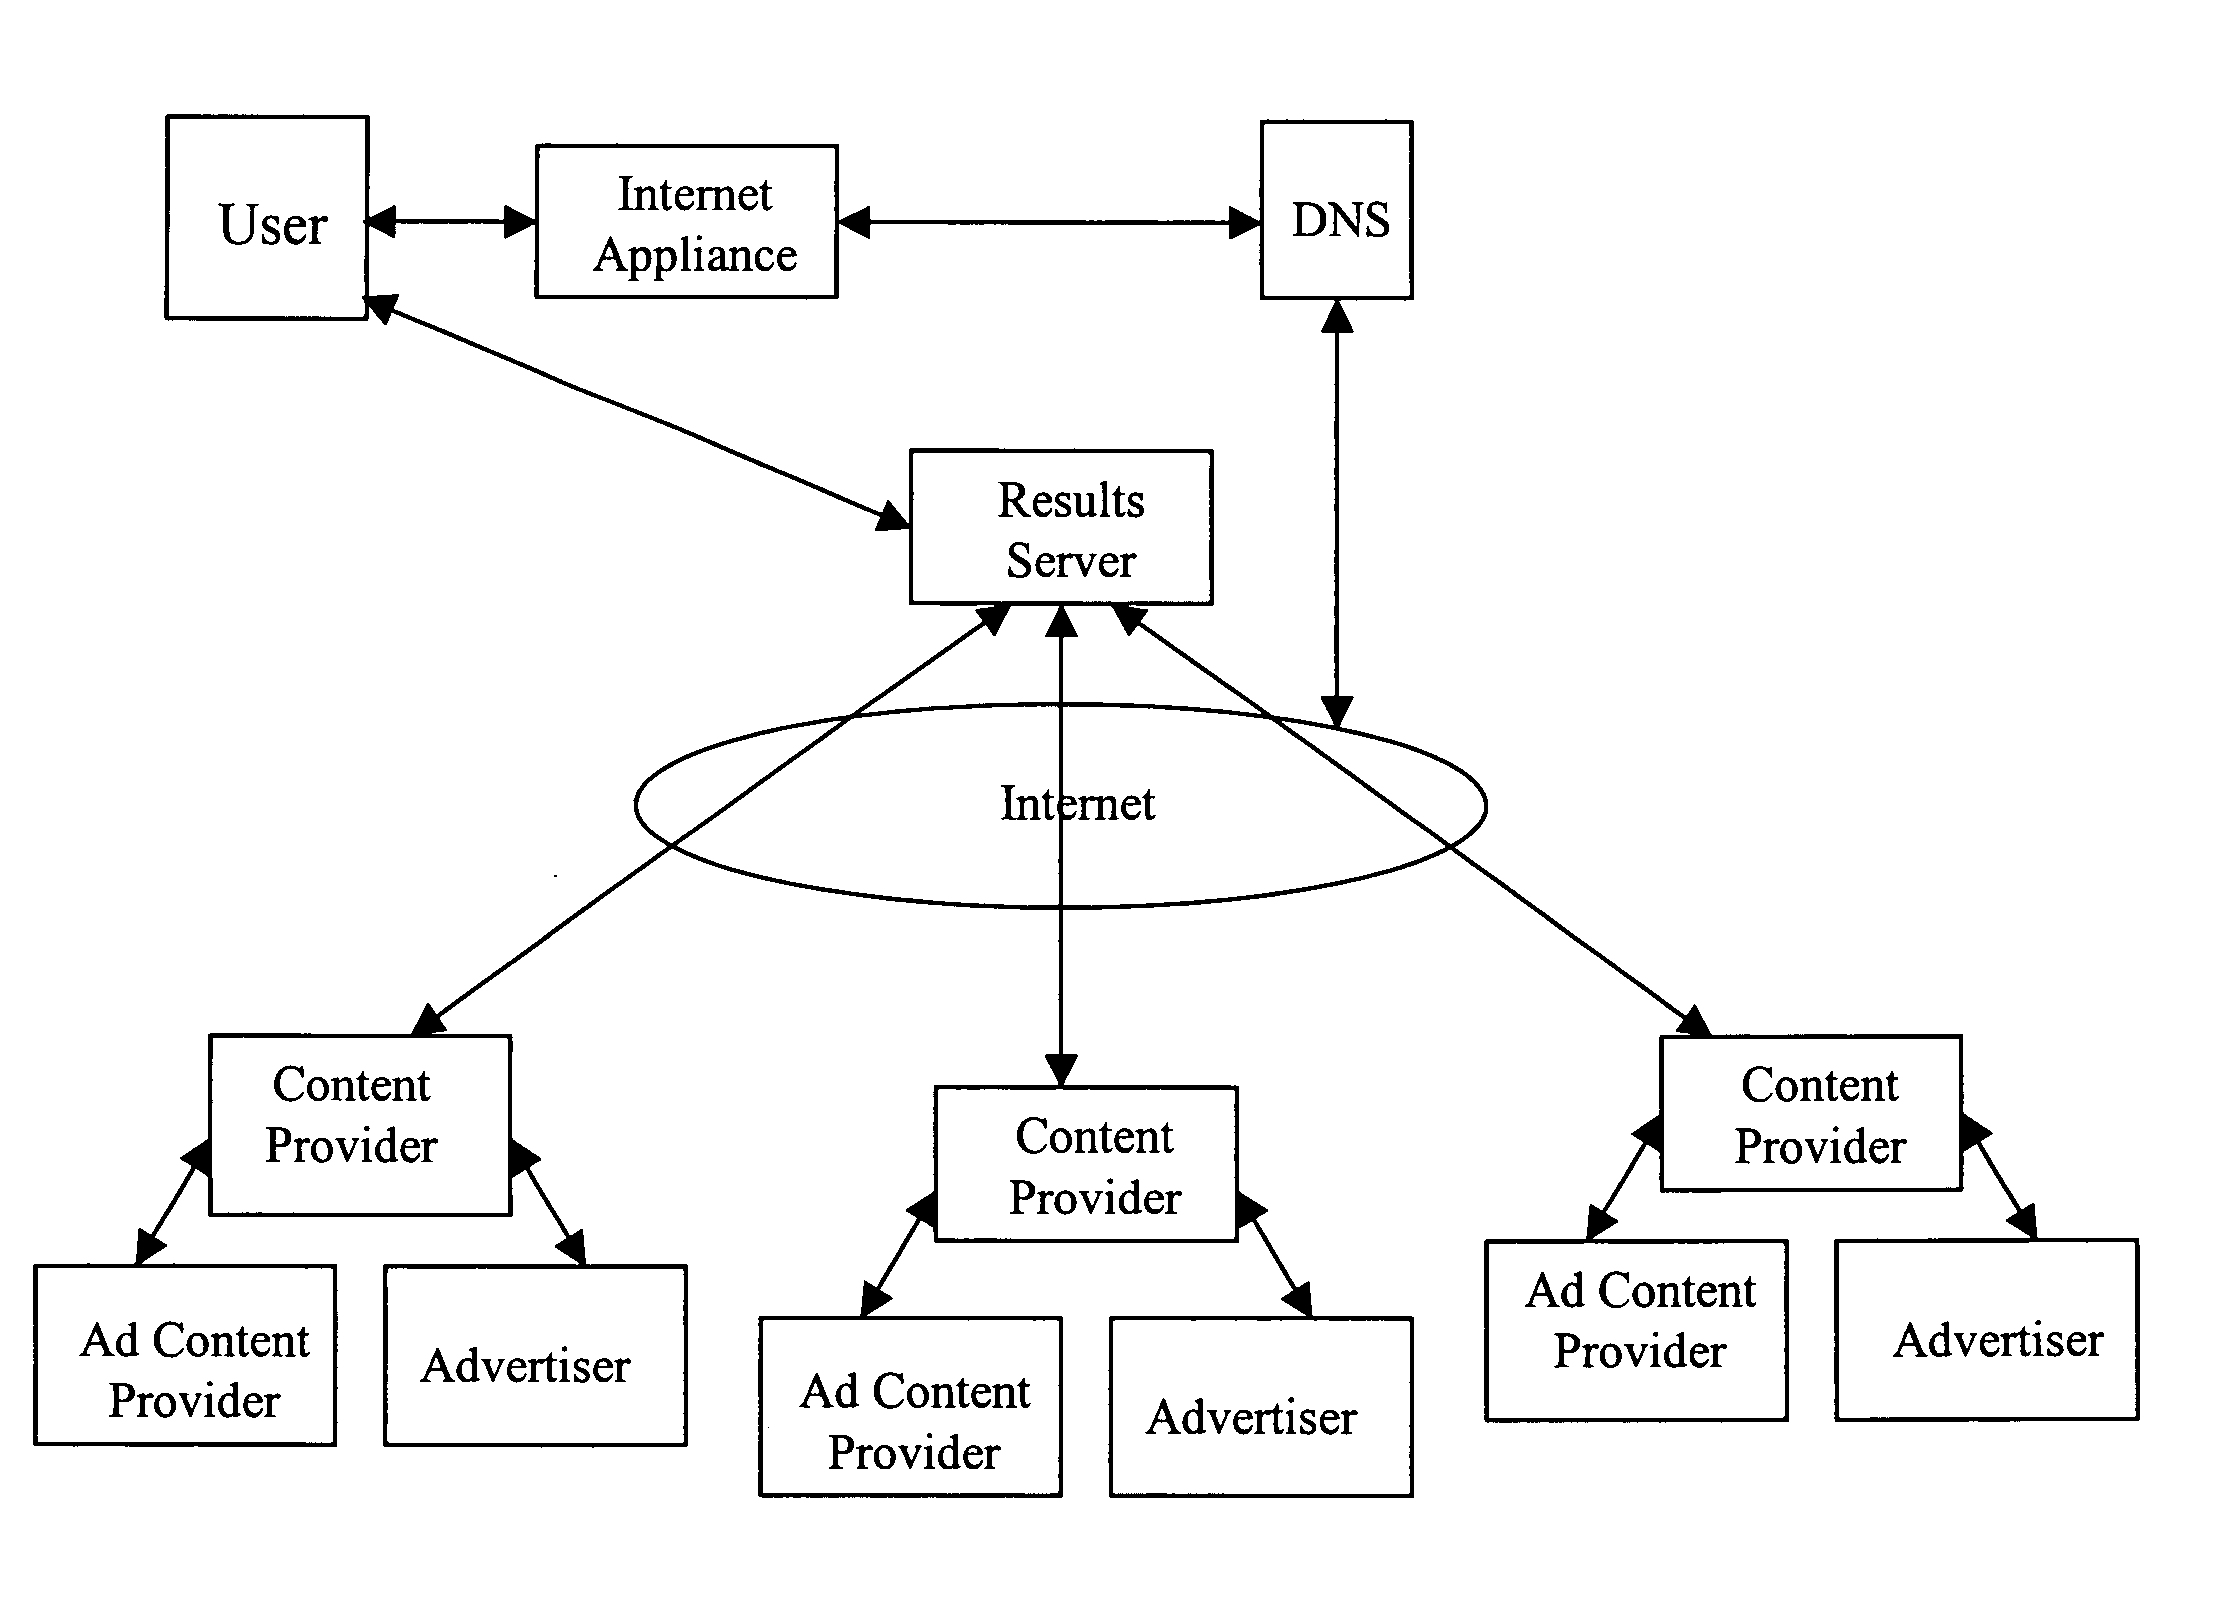 Systems and methods for providing information and conducting business using the internet